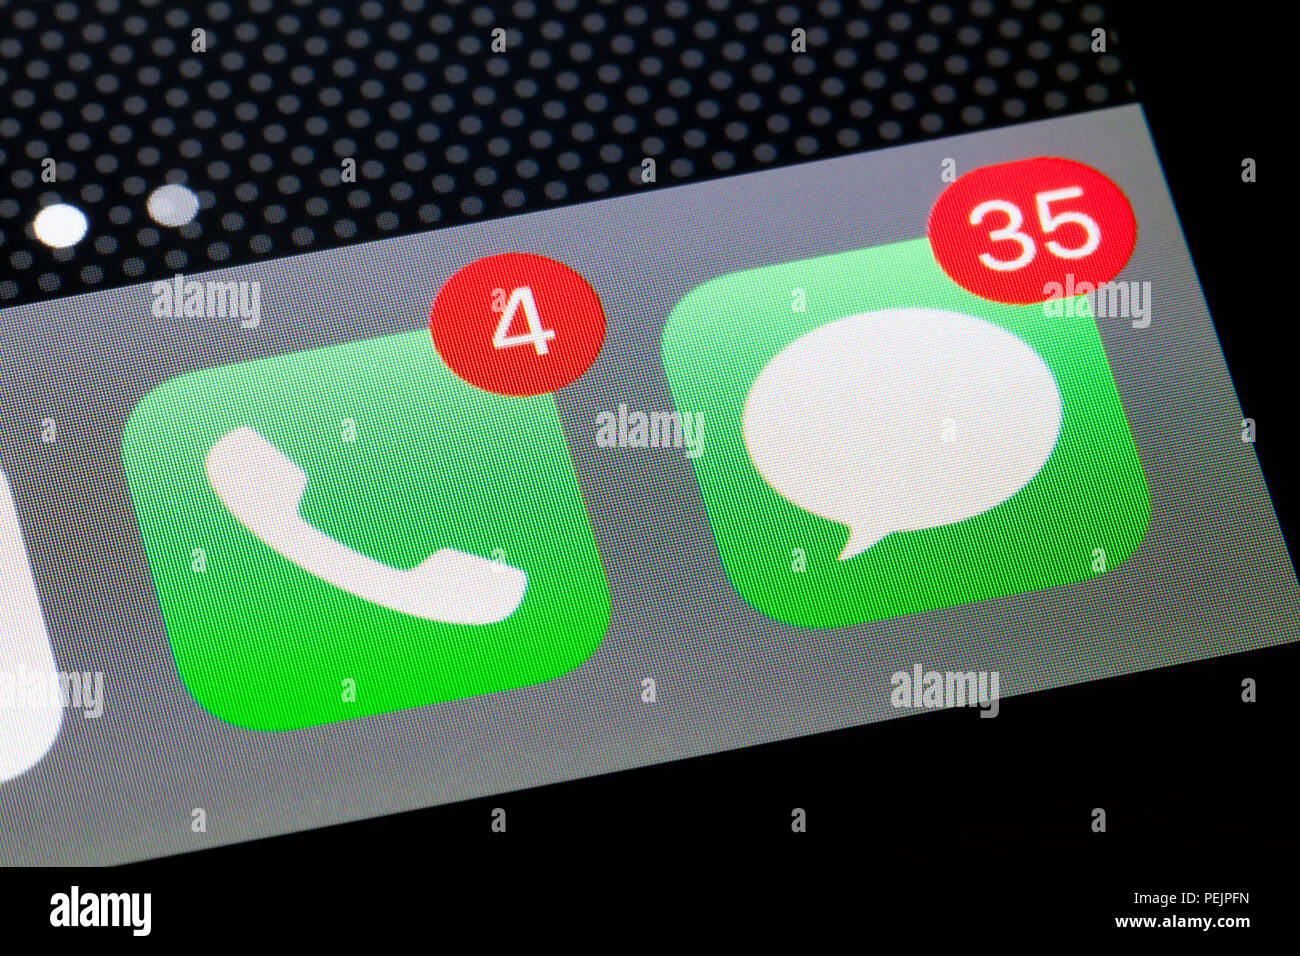 iPhone Phone and Messages icons showing missed calls notification badge (badges) - USA Stock Photo